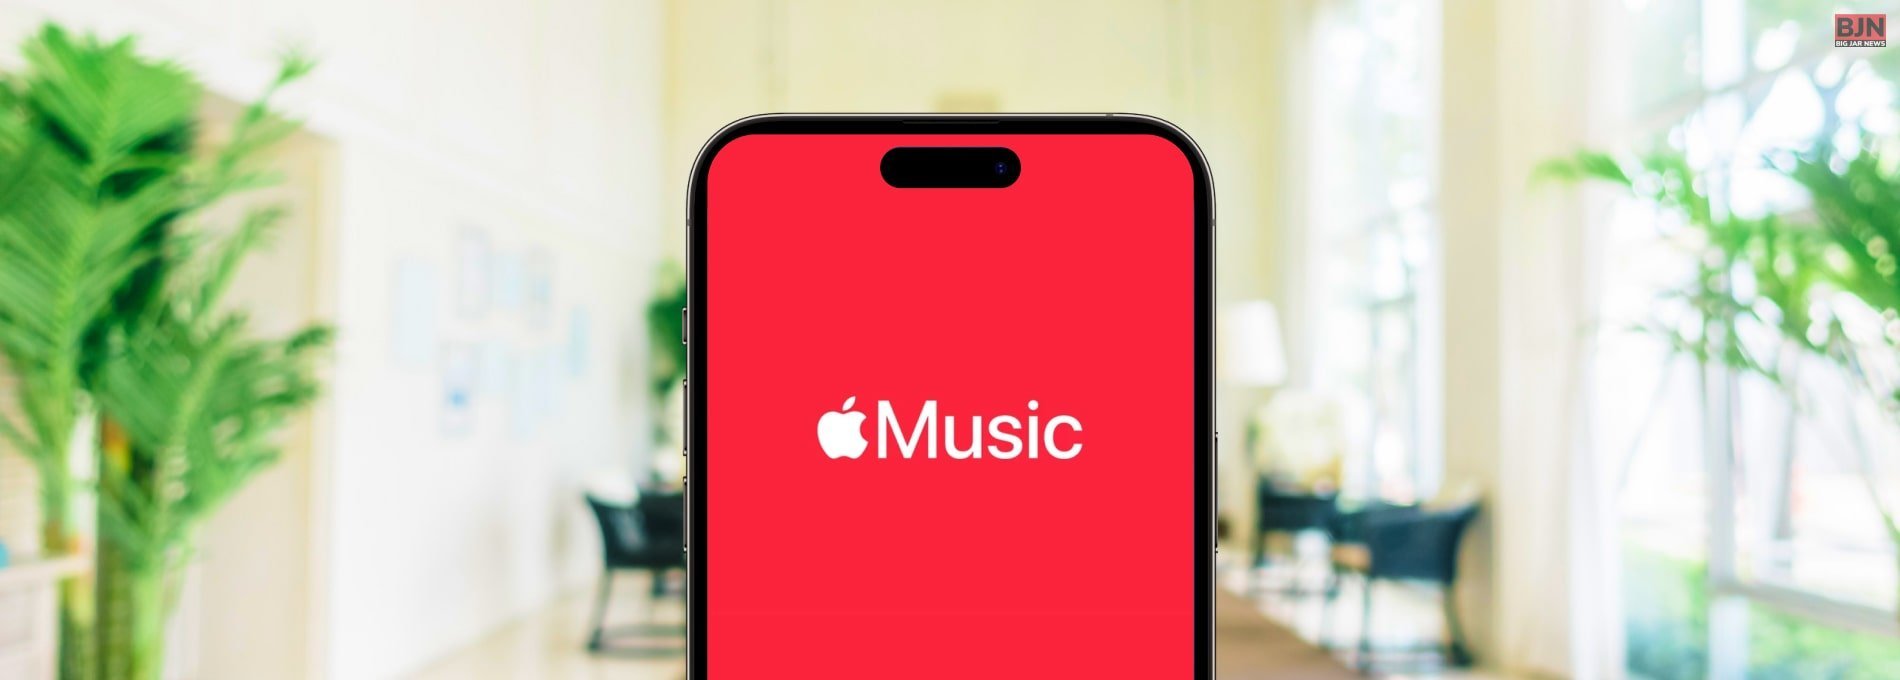 iOS Introduced 'New Apple Music' To Android User